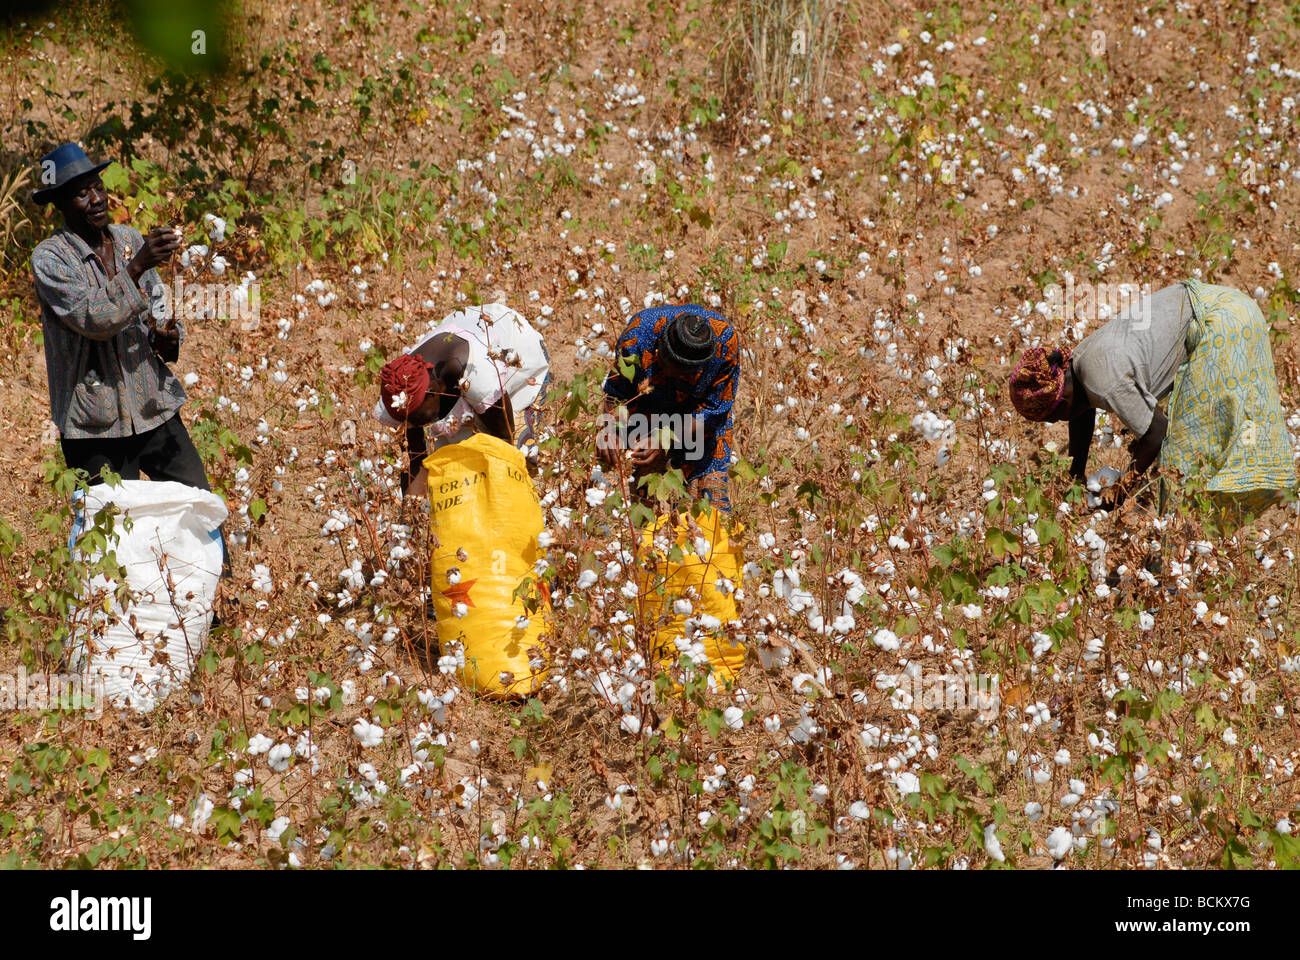 West Africa Burkina Faso , fairtrade and organic cotton project , man and woman harvest cotton at farm Stock Photo